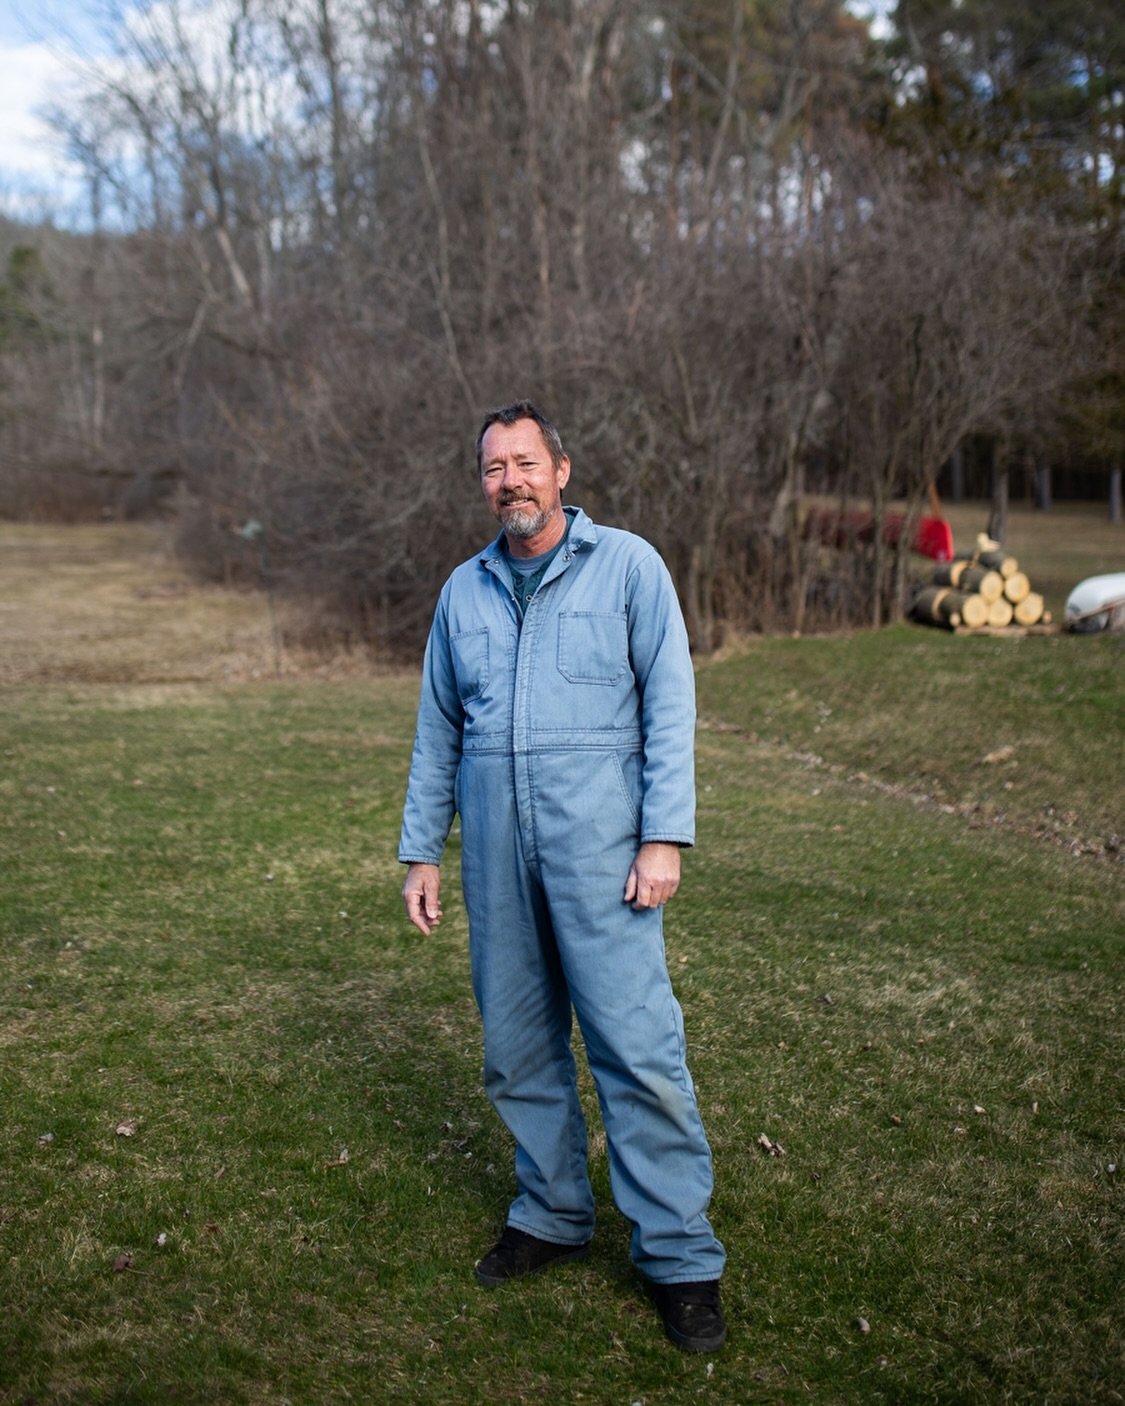 I made this portrait last month of my mum&rsquo;s partner + my step-dad, Jim, in his coveralls at home. Jim does a lot for our family and I&rsquo;m grateful for the relationship we&rsquo;ve come to have. Most recently, he helped me gather tires, boat